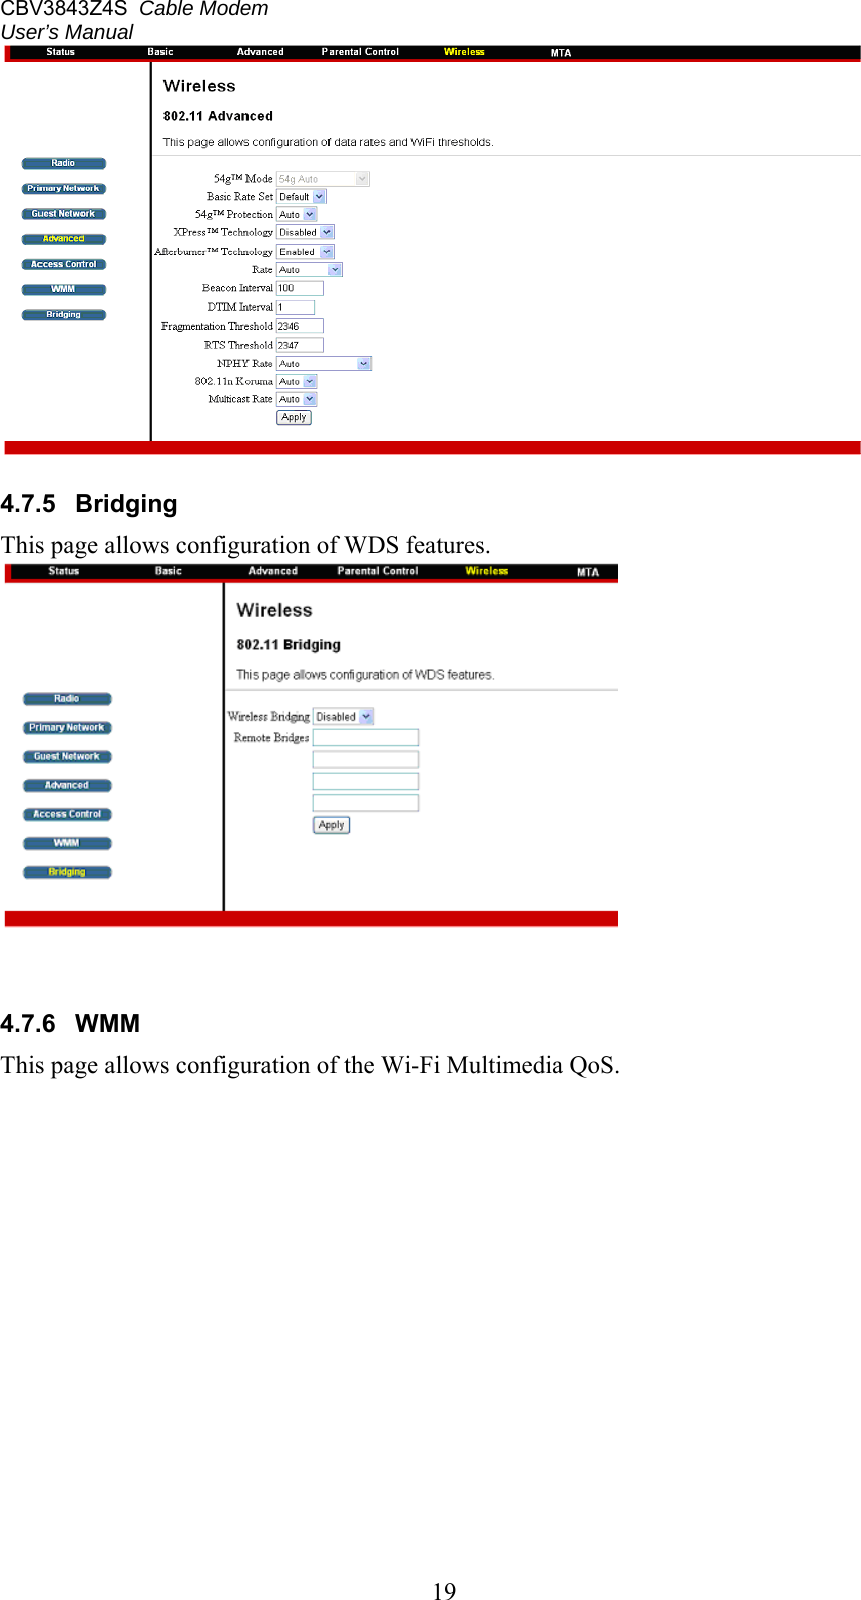 CBV3843Z4S  Cable Modem  User’s Manual   19  4.7.5  Bridging This page allows configuration of WDS features.    4.7.6  WMM This page allows configuration of the Wi-Fi Multimedia QoS.   